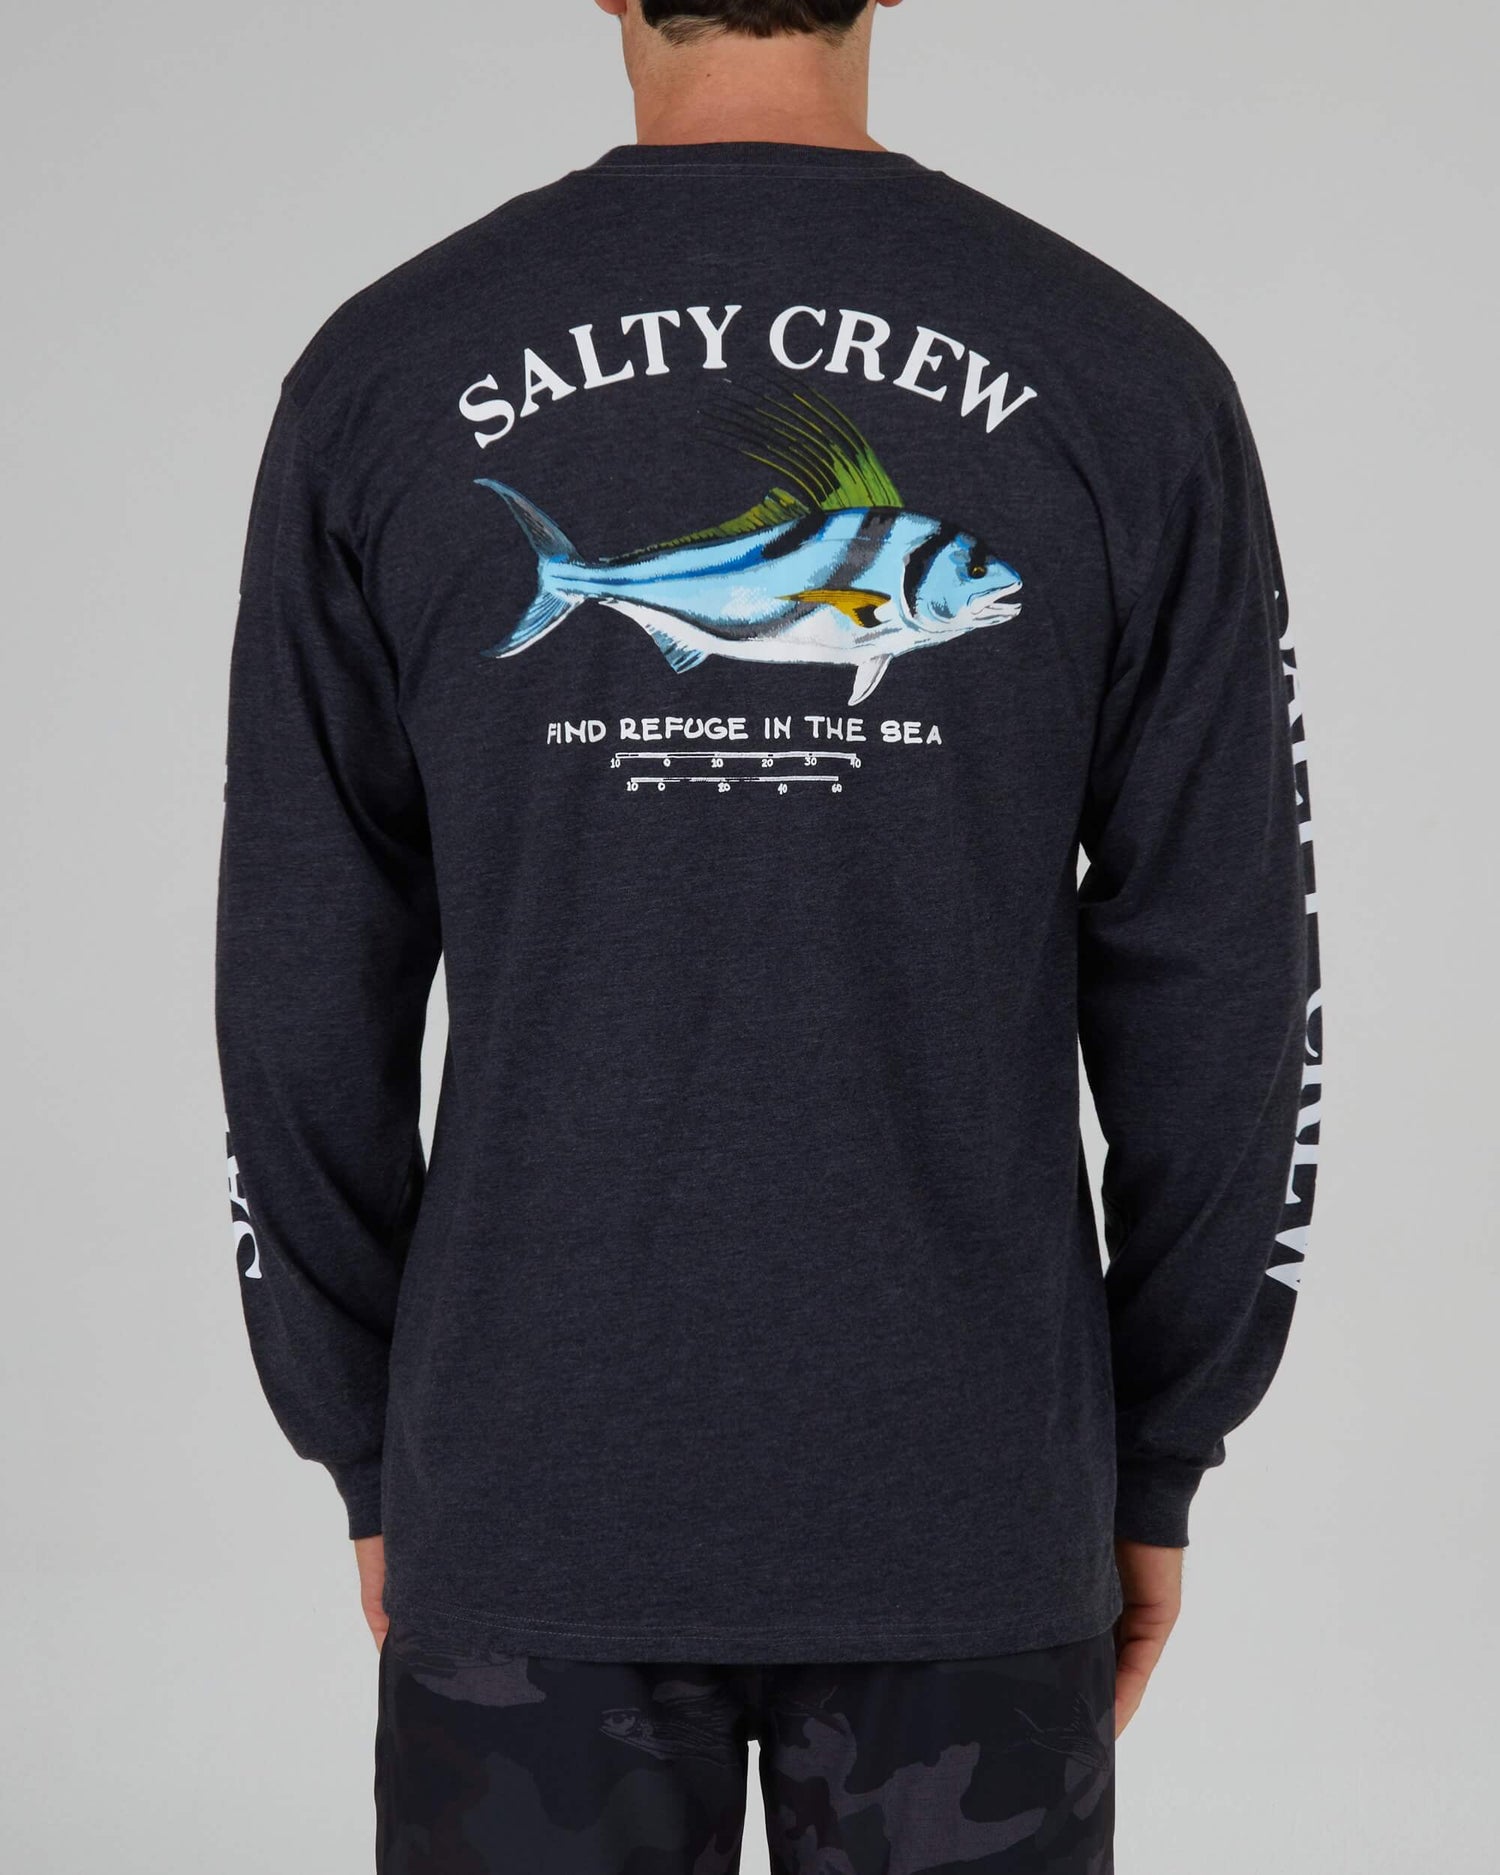 Salty crew T-SHIRTS L/S Rooster Premium L/S Tee - Charcoal Heather in CHARCOAL HEATHER